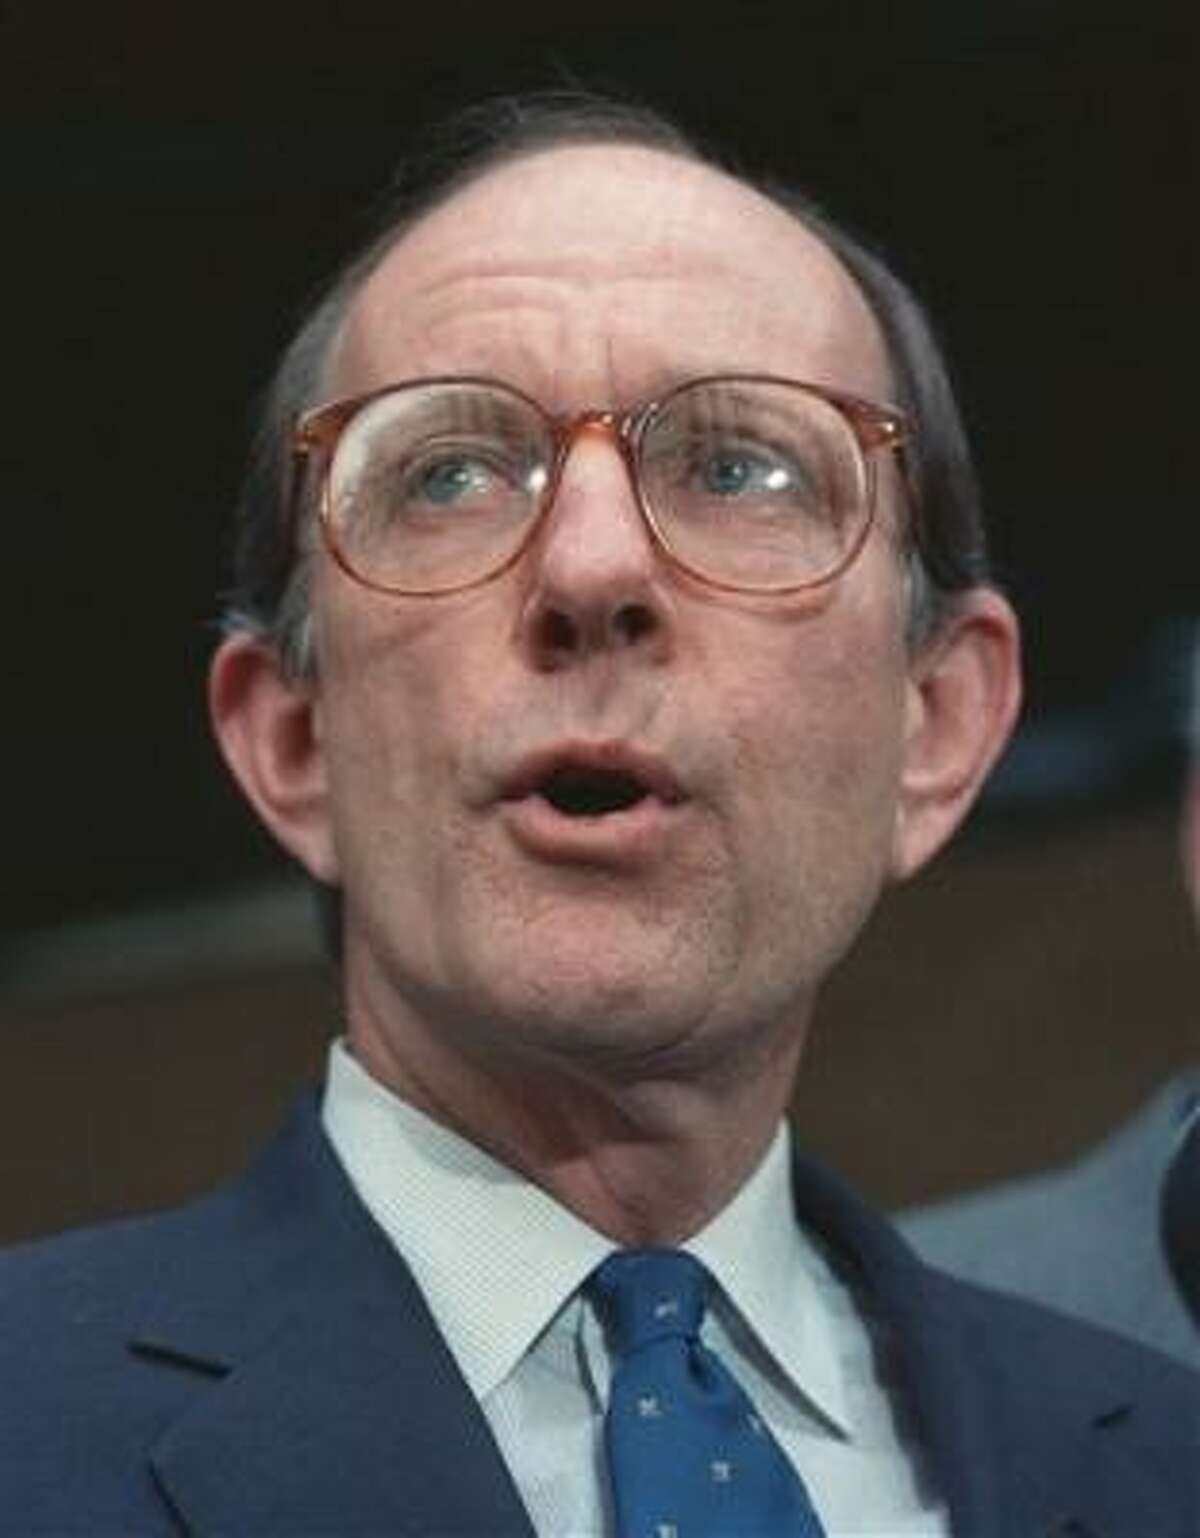 Former presidential aide Michael Deaver, shown in 1987, was both praised and criticized for focusing on how President Reagan looked as much as what the president said during public appearances.